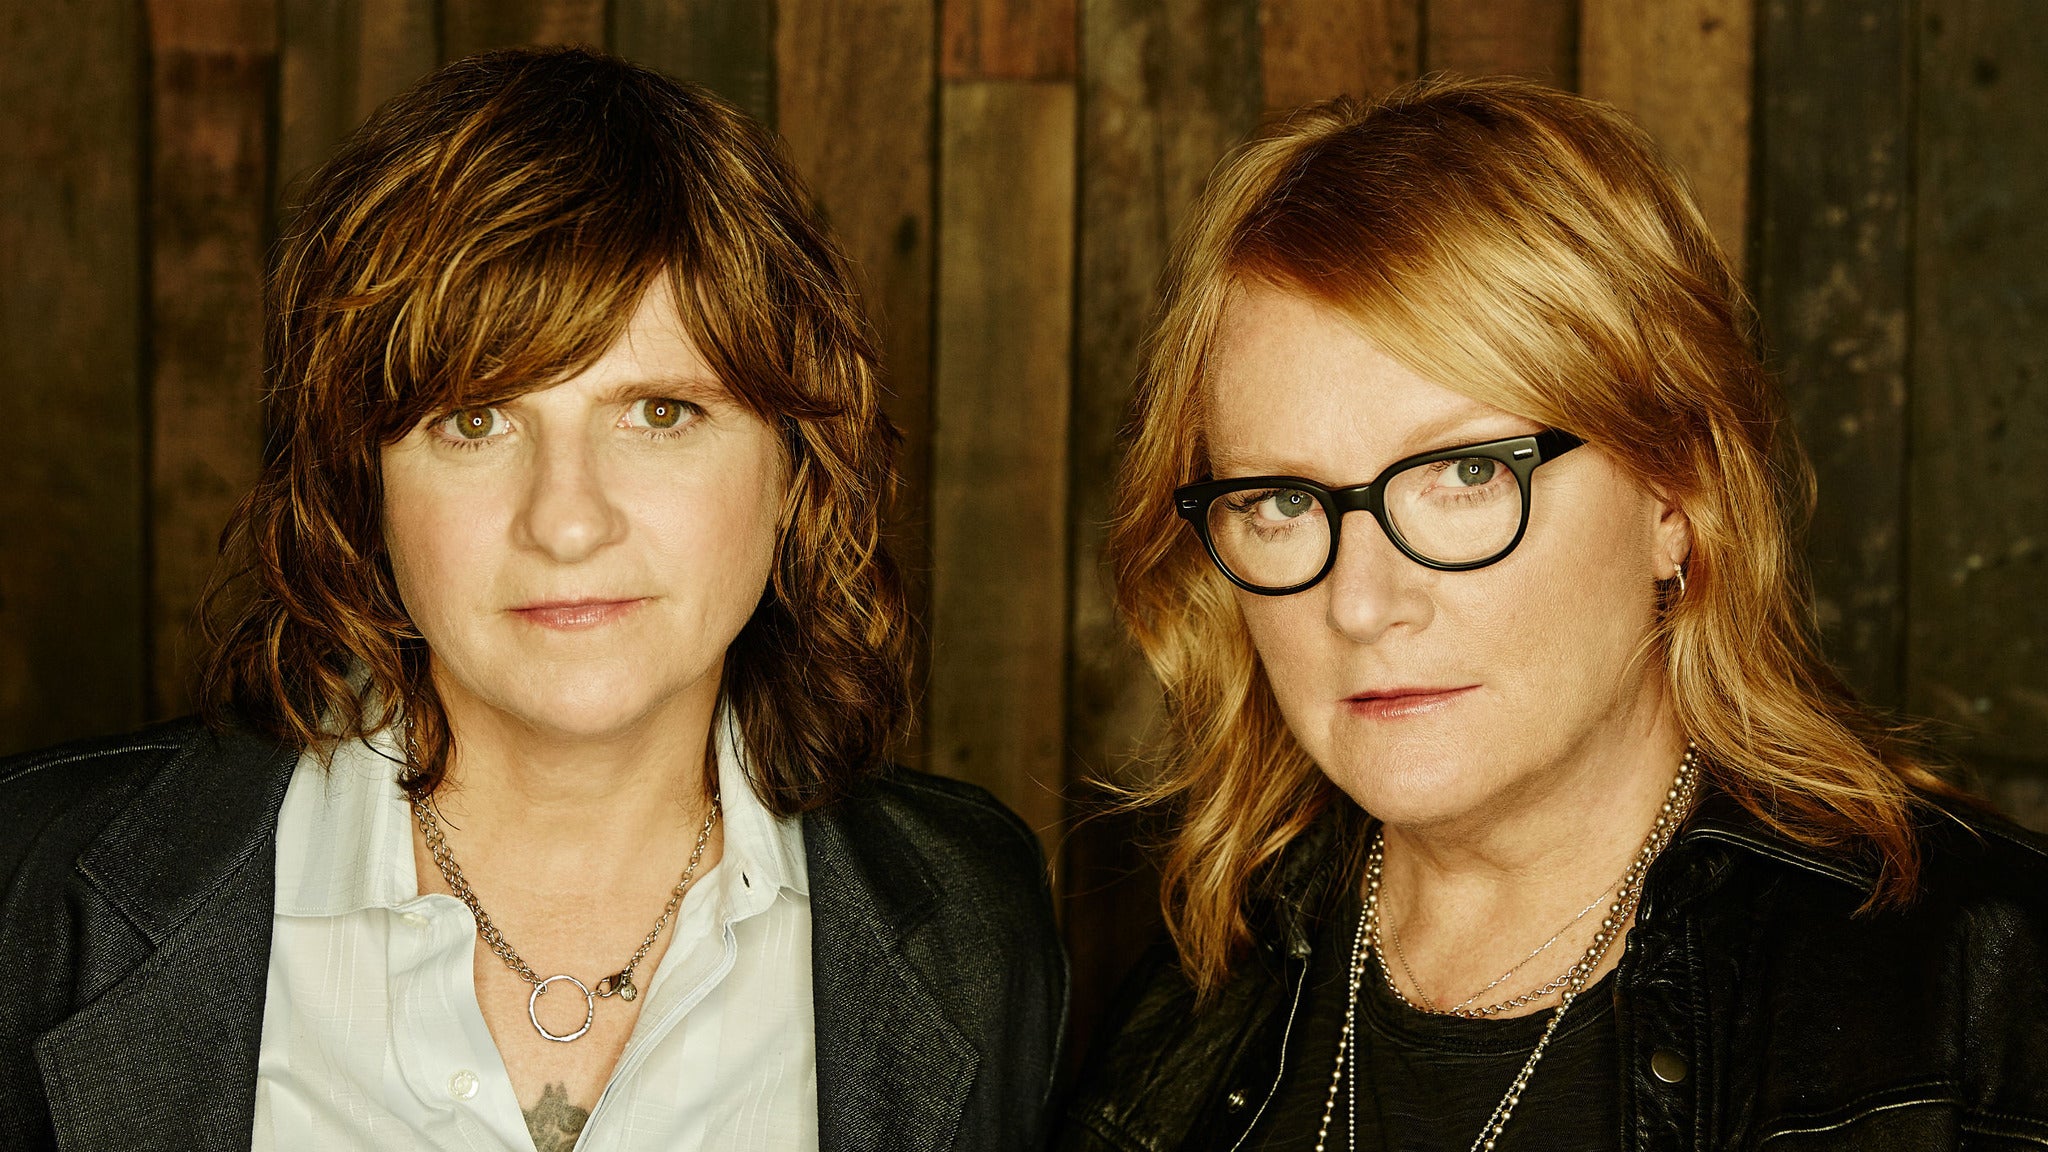 new presale password for Indigo Girls face value tickets in Port Chester at The Capitol Theatre